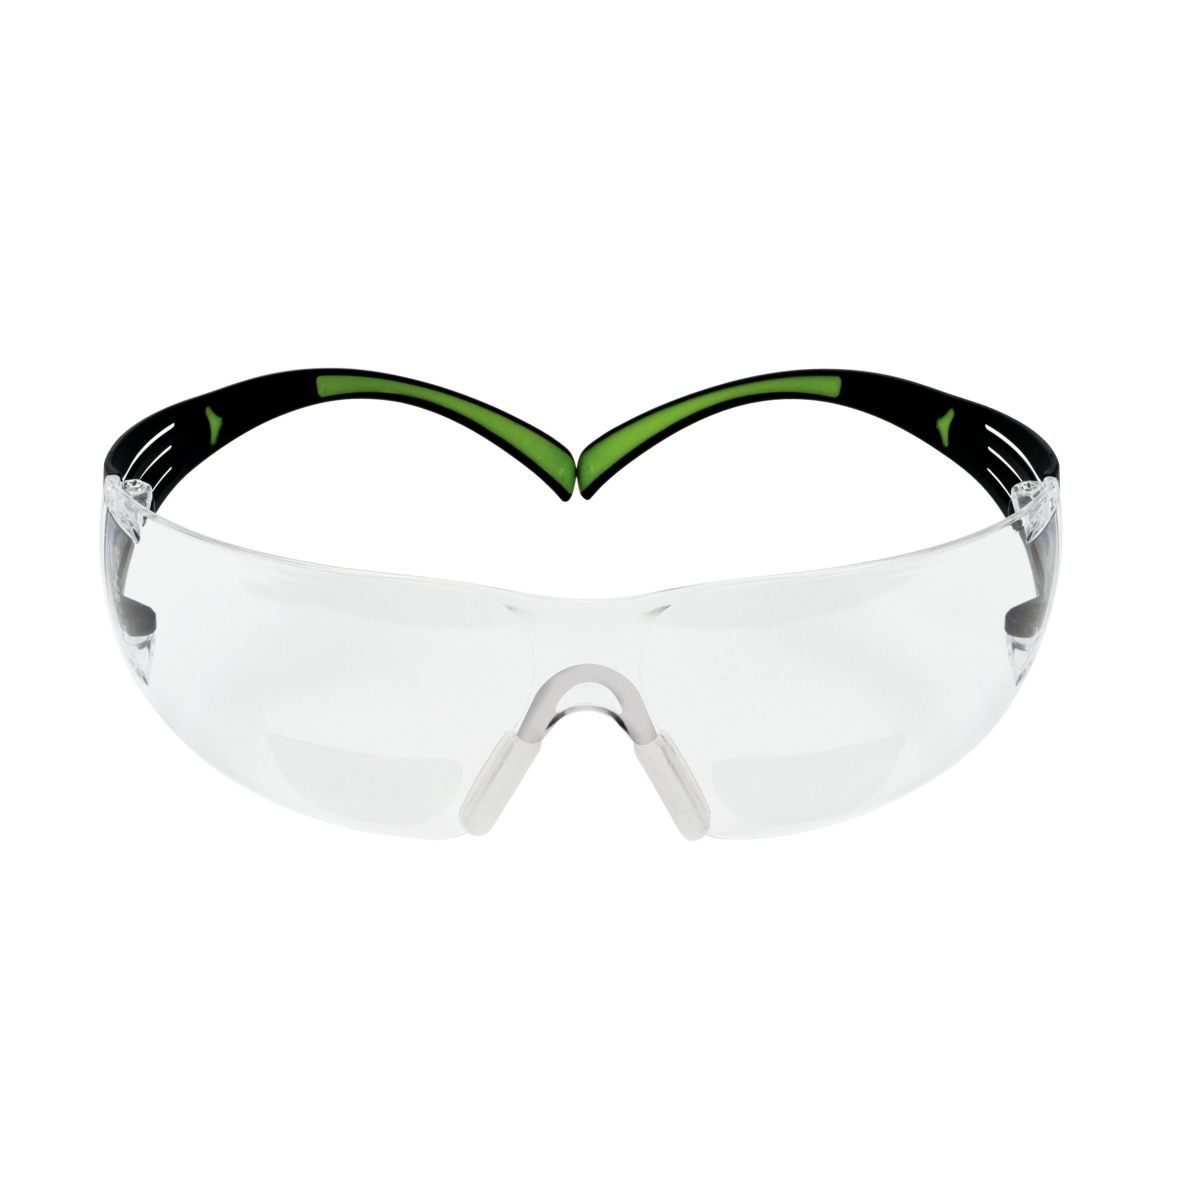 3M™ SecureFit™ Protective Eyewear SF425AF, Clear Lens, +2.5 Diopter (Availability restrictions apply.)